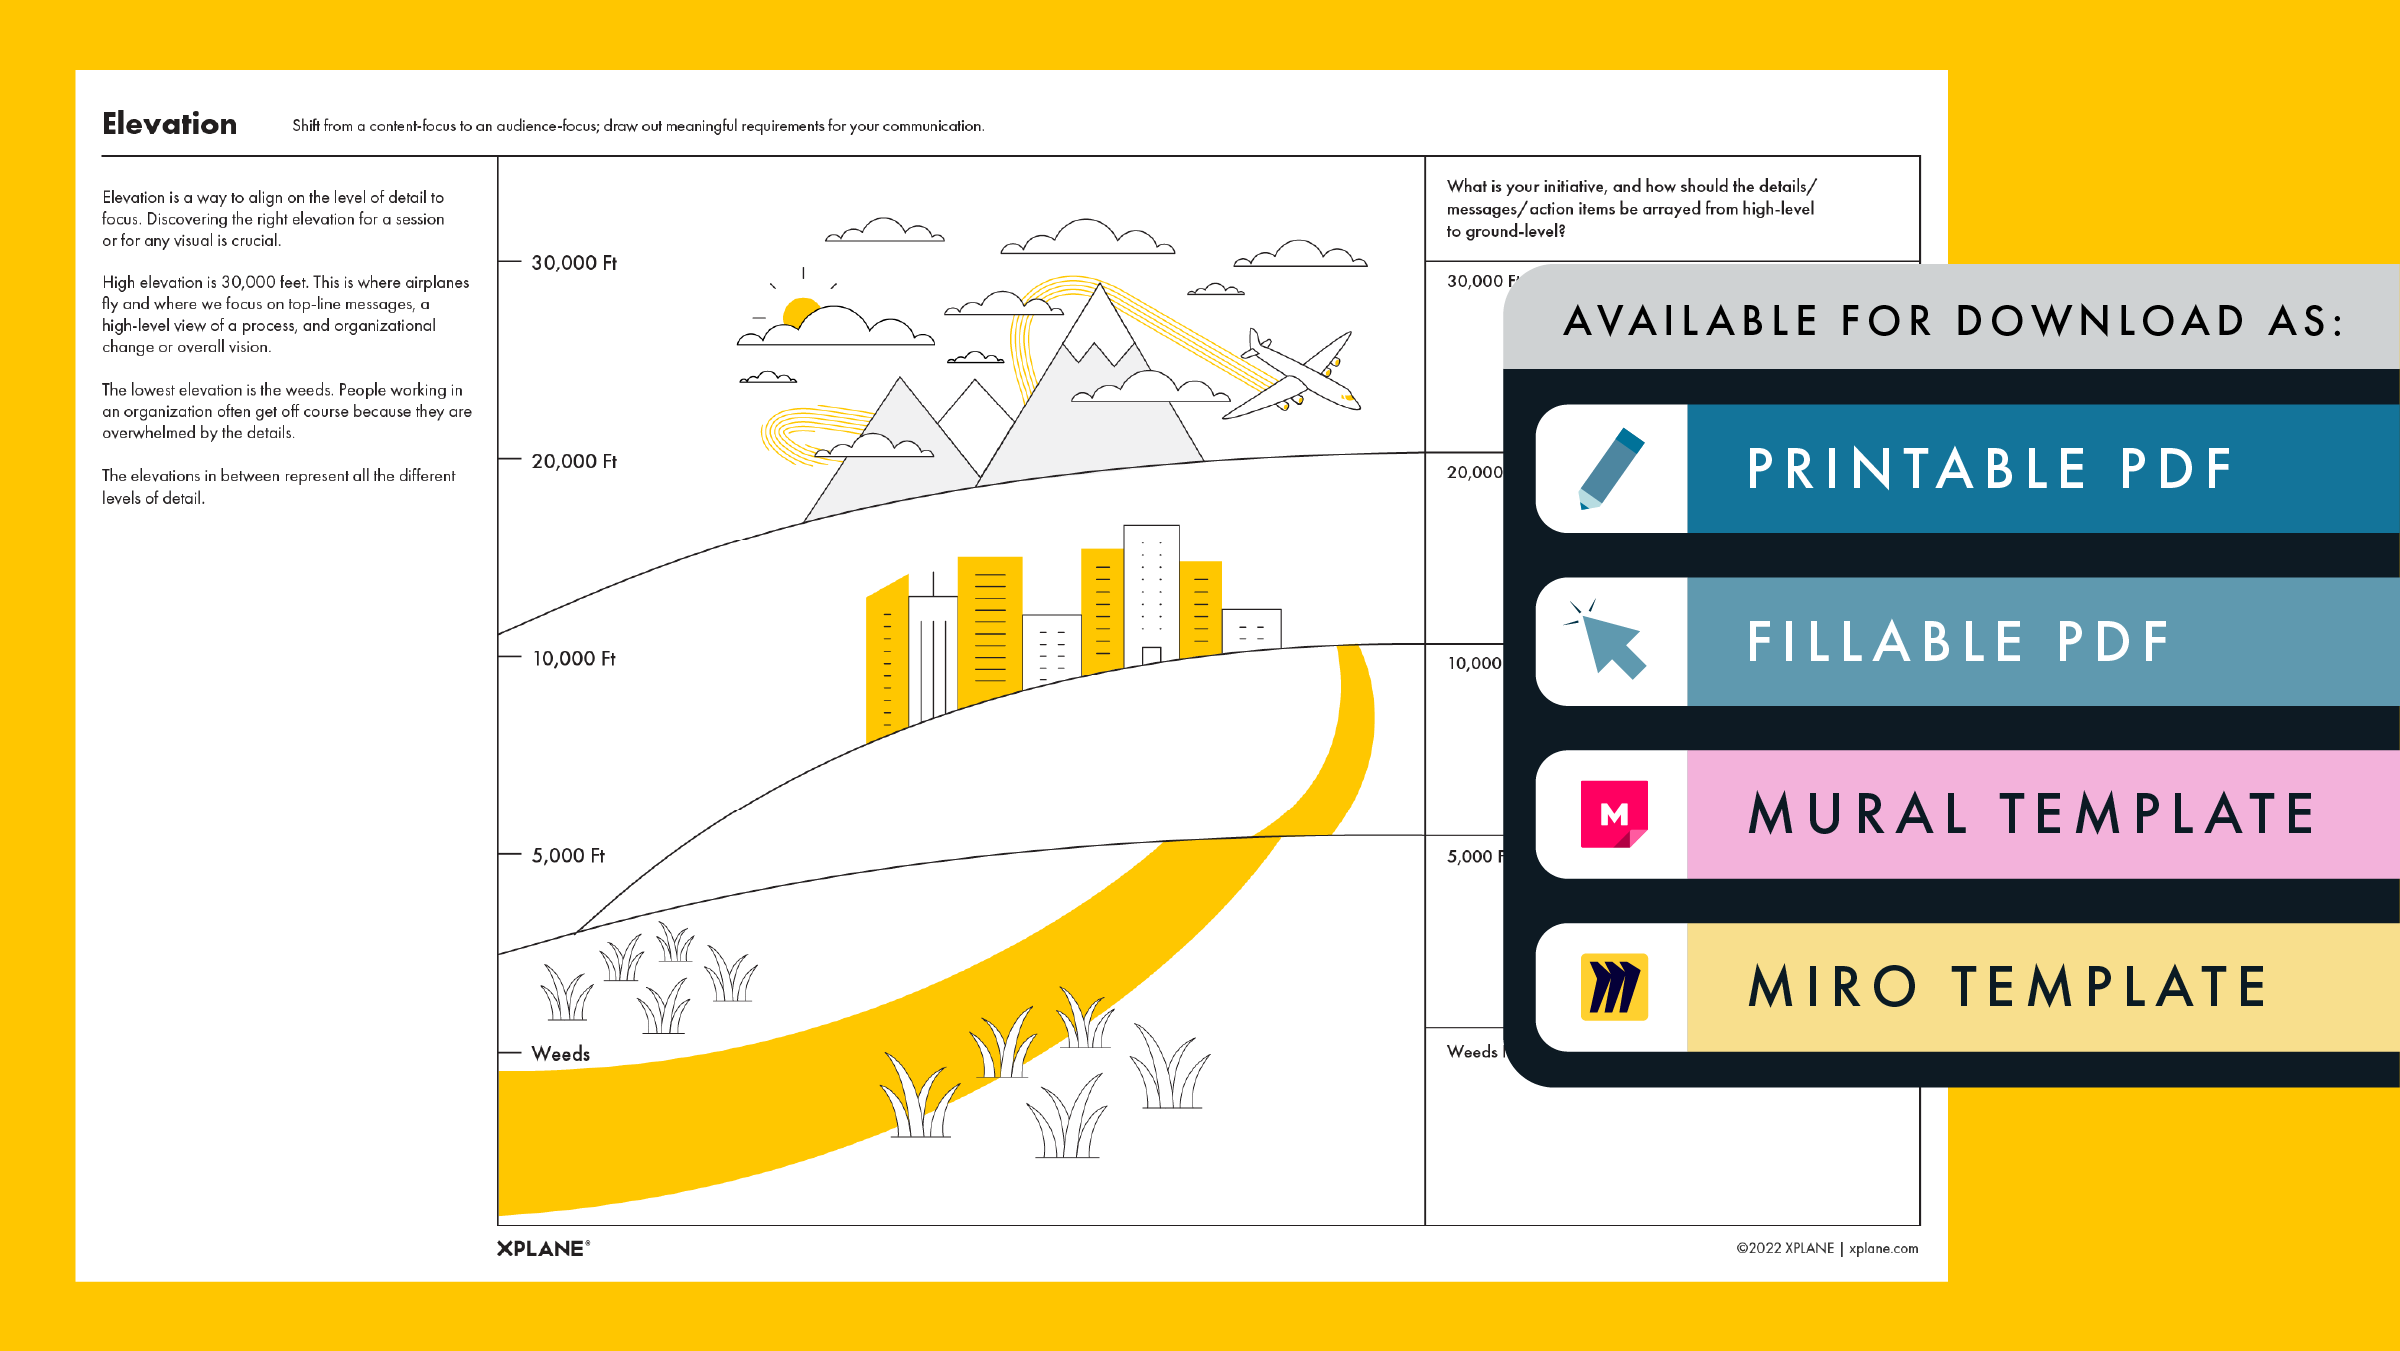 Elevation worksheet against a yellow background. Four tabs under the header "AVAILABLE FOR DOWNLOAD AS" indicate available file types available.